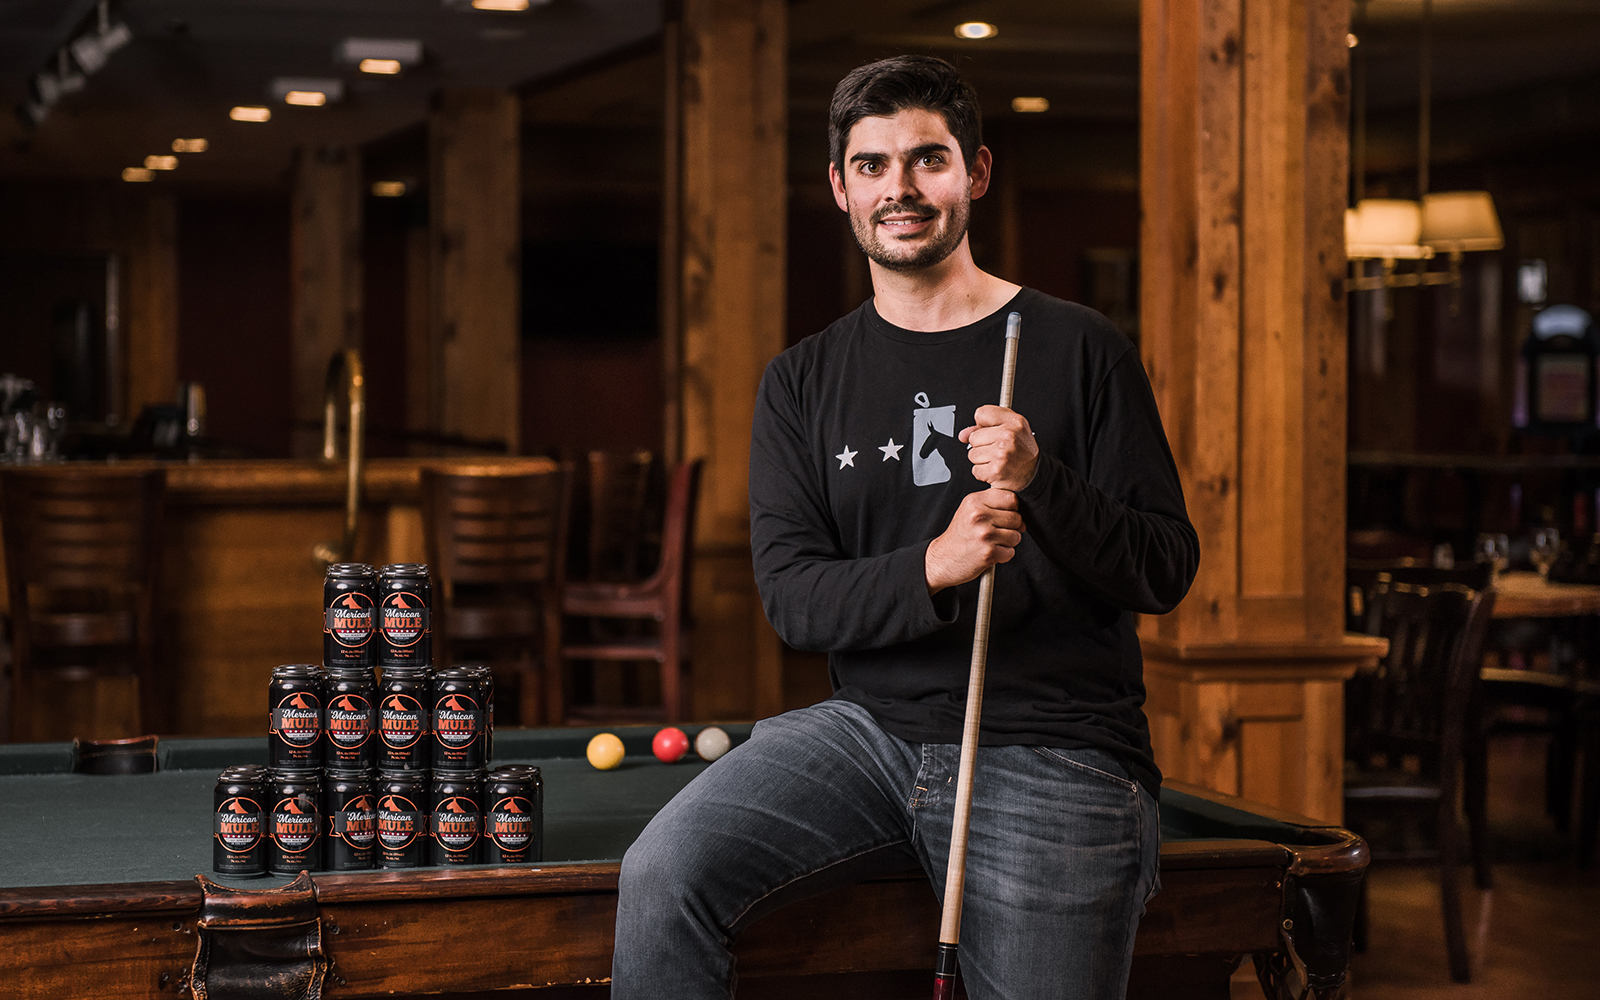 Dean Mahoney '09, pictured above, co-founded ‘Merican Mule in 2015. He is spearheading East Coast distribution of his company's namesake, an alcoholic beverage inspired by the Moscow Mule. (Nathan Oldham/UConn School of Business)